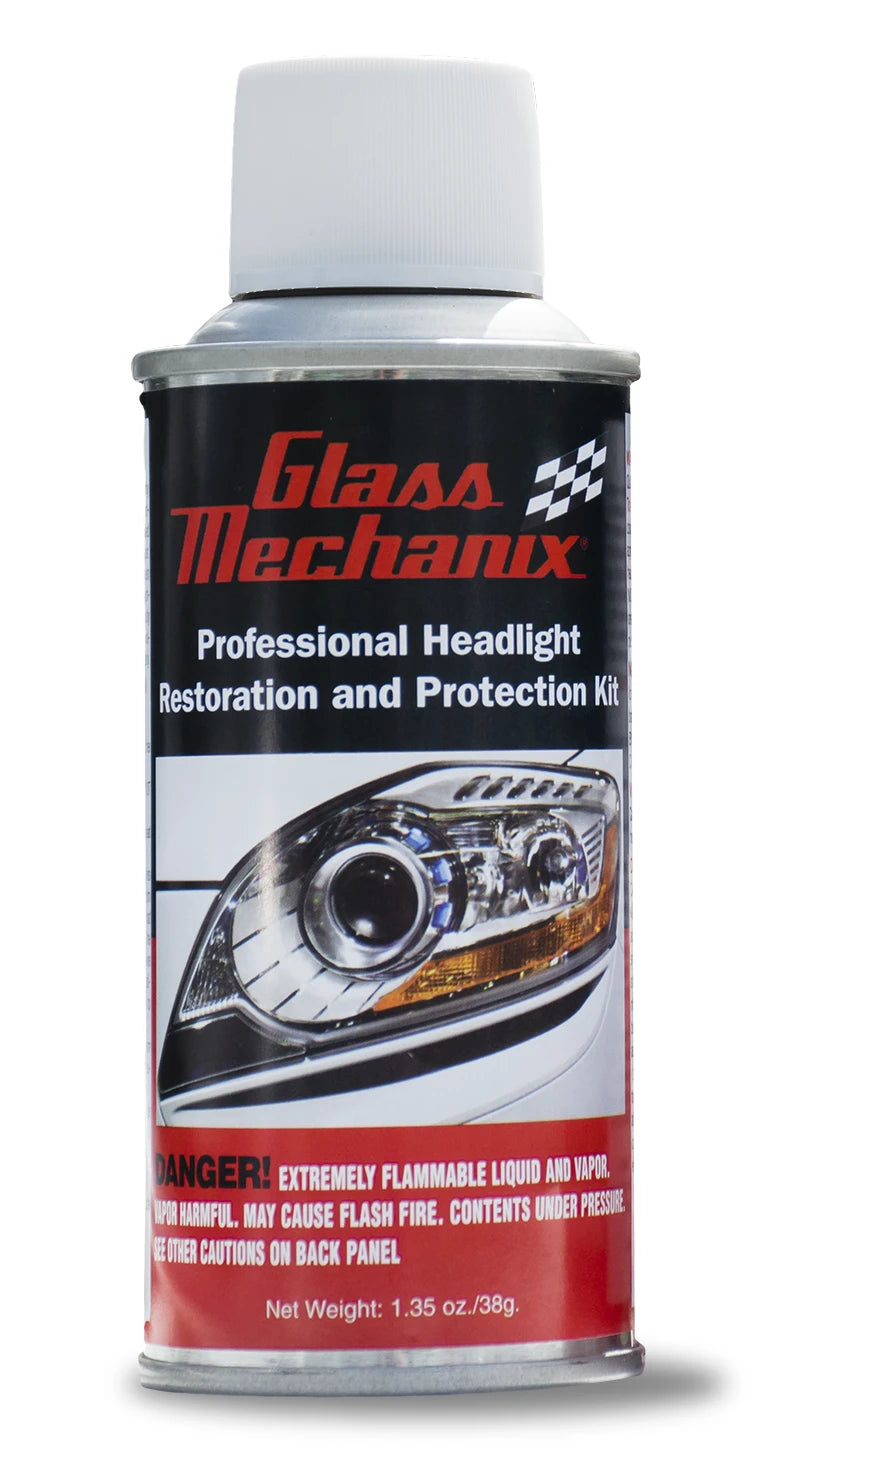 GLASS MECHANIX RAPID CLEAR HEADLIGHT RESTORATION - 1 CAN (UPS GROUND ONLY) - JAAGS